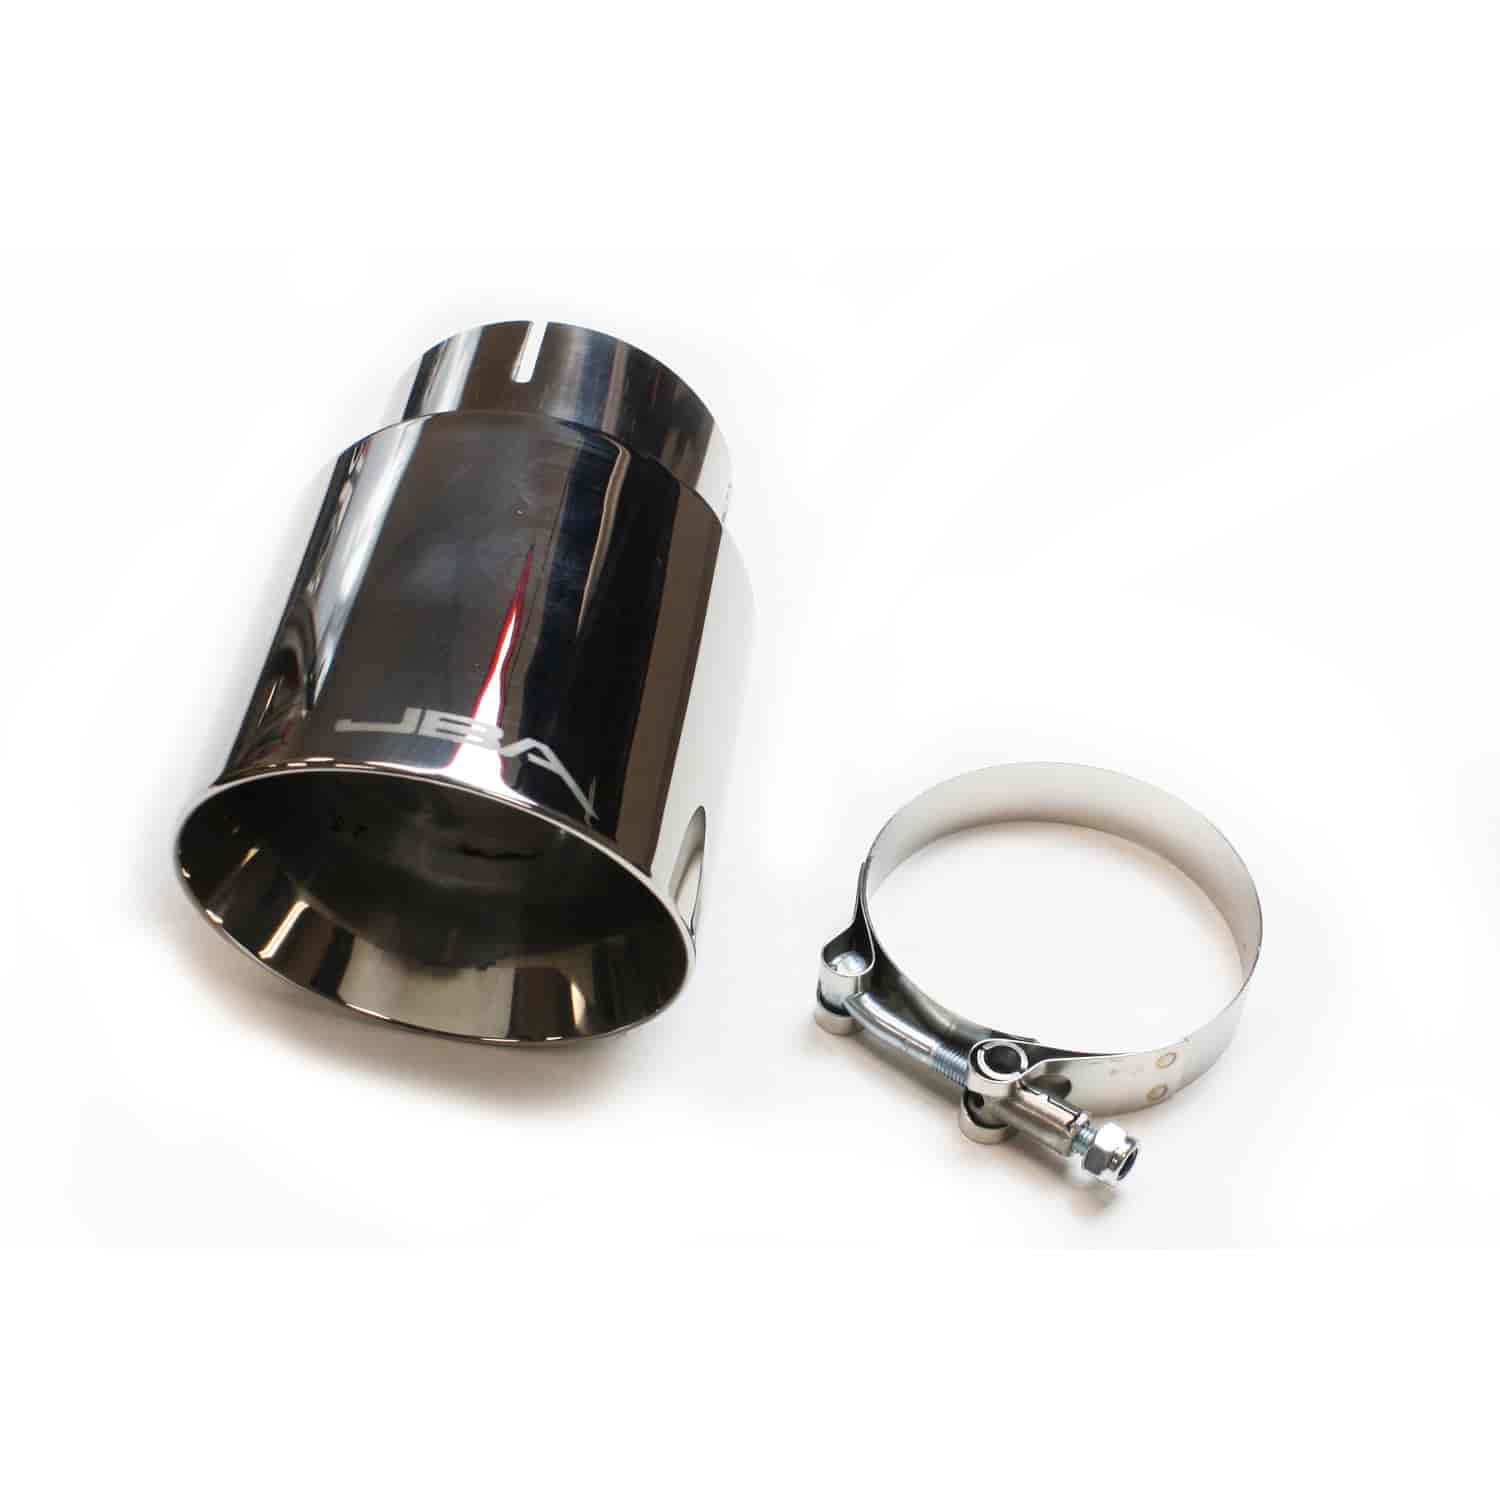 JBA Performance Exhaust 12-8276 3? x 4? x 7 5/8? Double Wall Polished S/S Chrome Tip - Clamp on